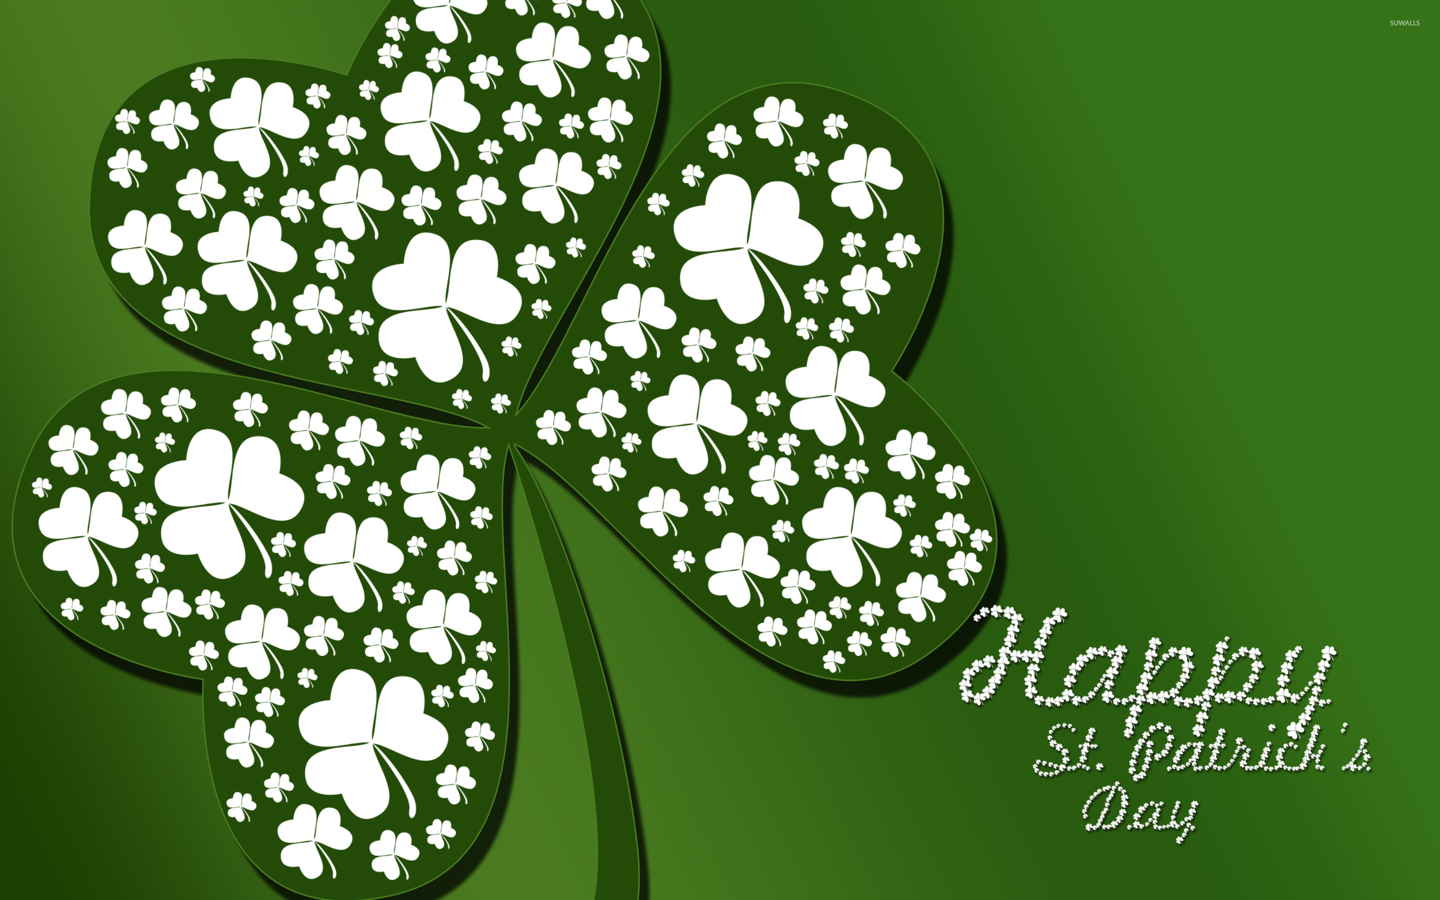 St. Patrick's Day 2018 funny Quotes, Wishes, Messages. St